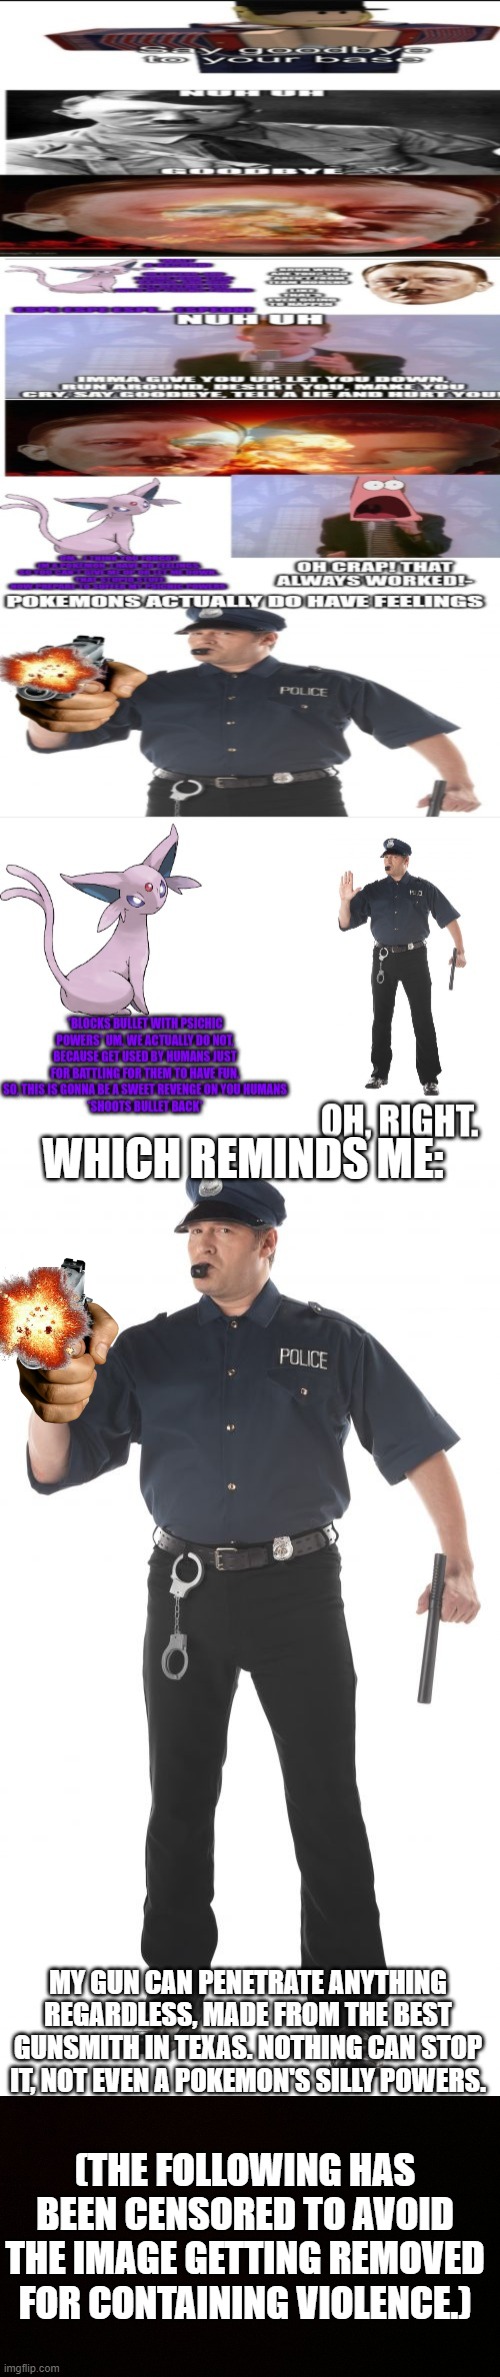 WHICH REMINDS ME:; MY GUN CAN PENETRATE ANYTHING REGARDLESS, MADE FROM THE BEST GUNSMITH IN TEXAS. NOTHING CAN STOP IT, NOT EVEN A POKEMON'S SILLY POWERS. (THE FOLLOWING HAS BEEN CENSORED TO AVOID THE IMAGE GETTING REMOVED FOR CONTAINING VIOLENCE.) | image tagged in memes,stop cop,blank censor | made w/ Imgflip meme maker